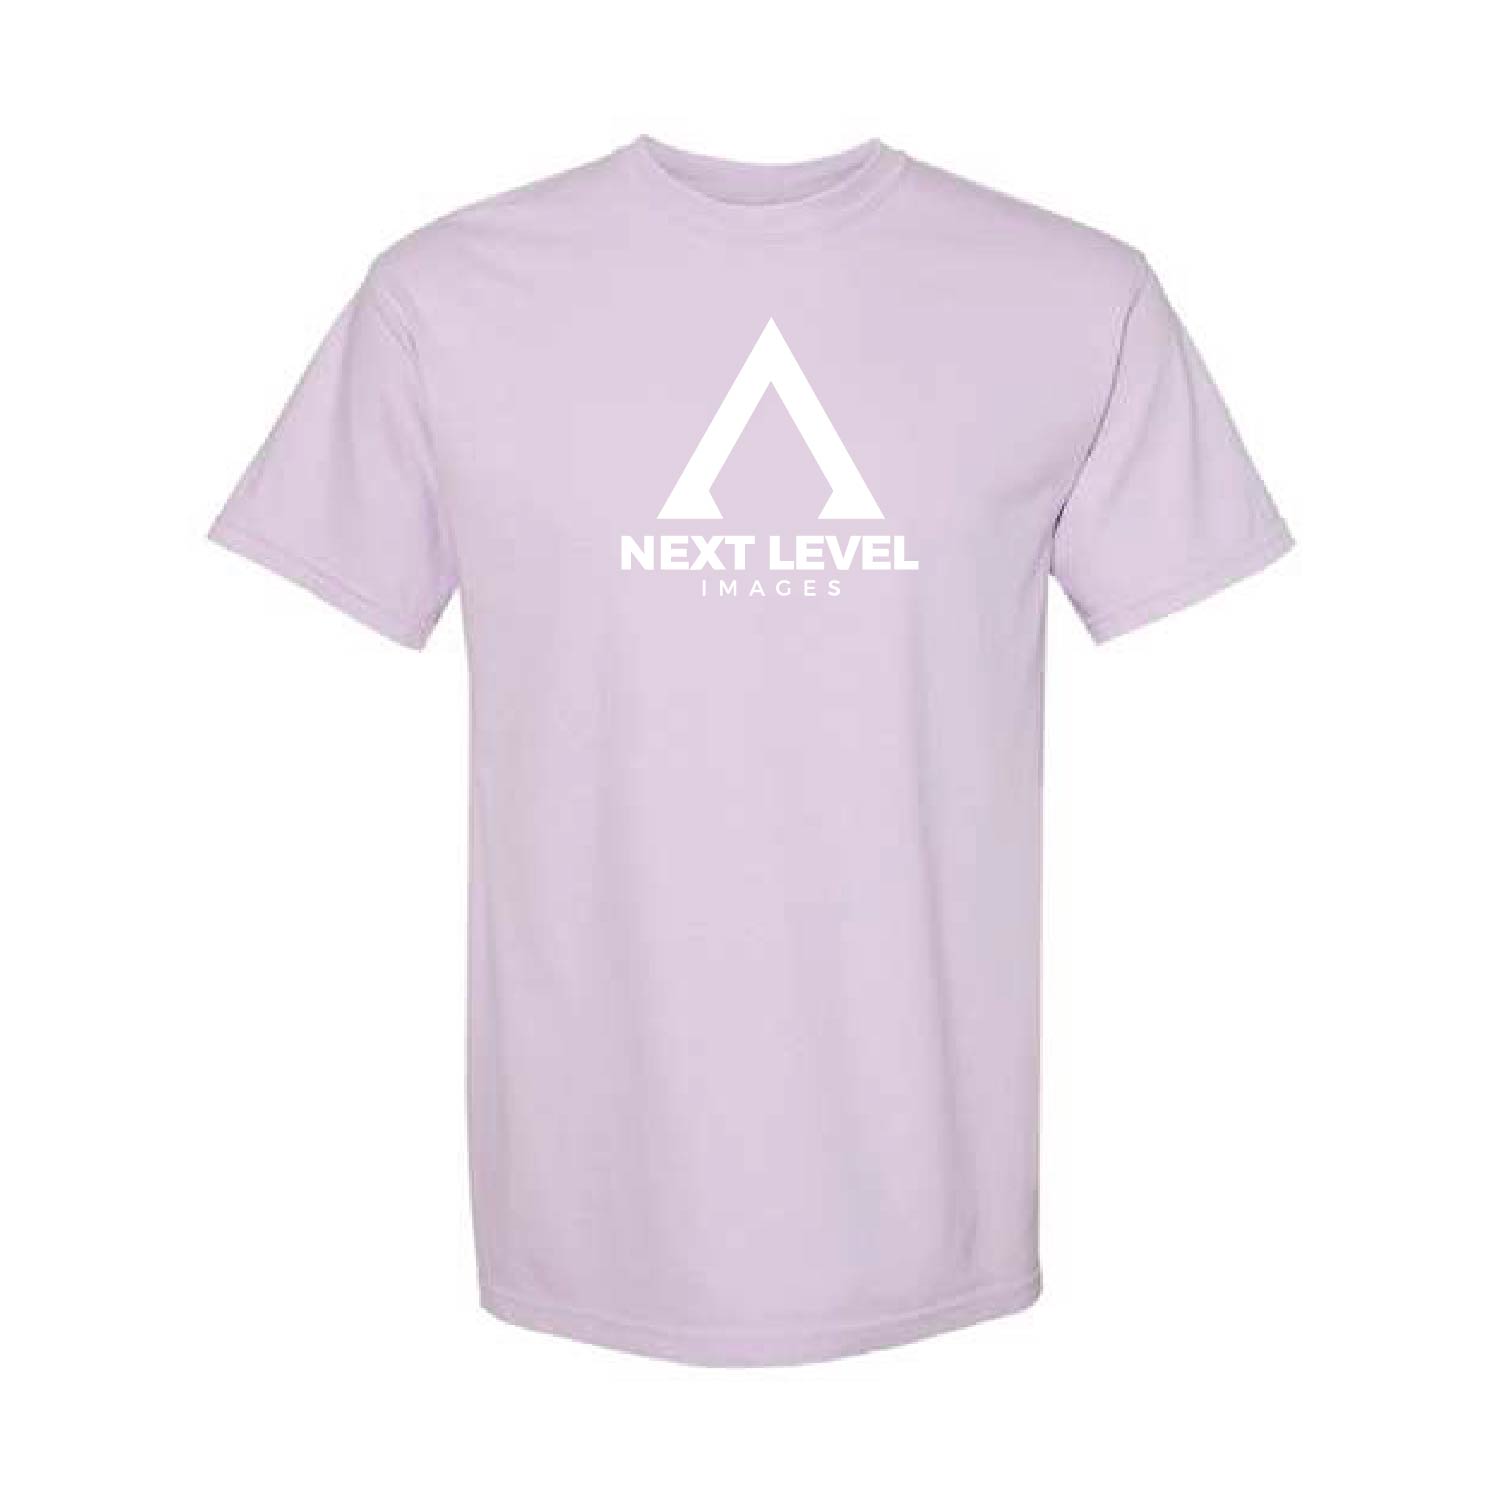 Next Level Images Tees